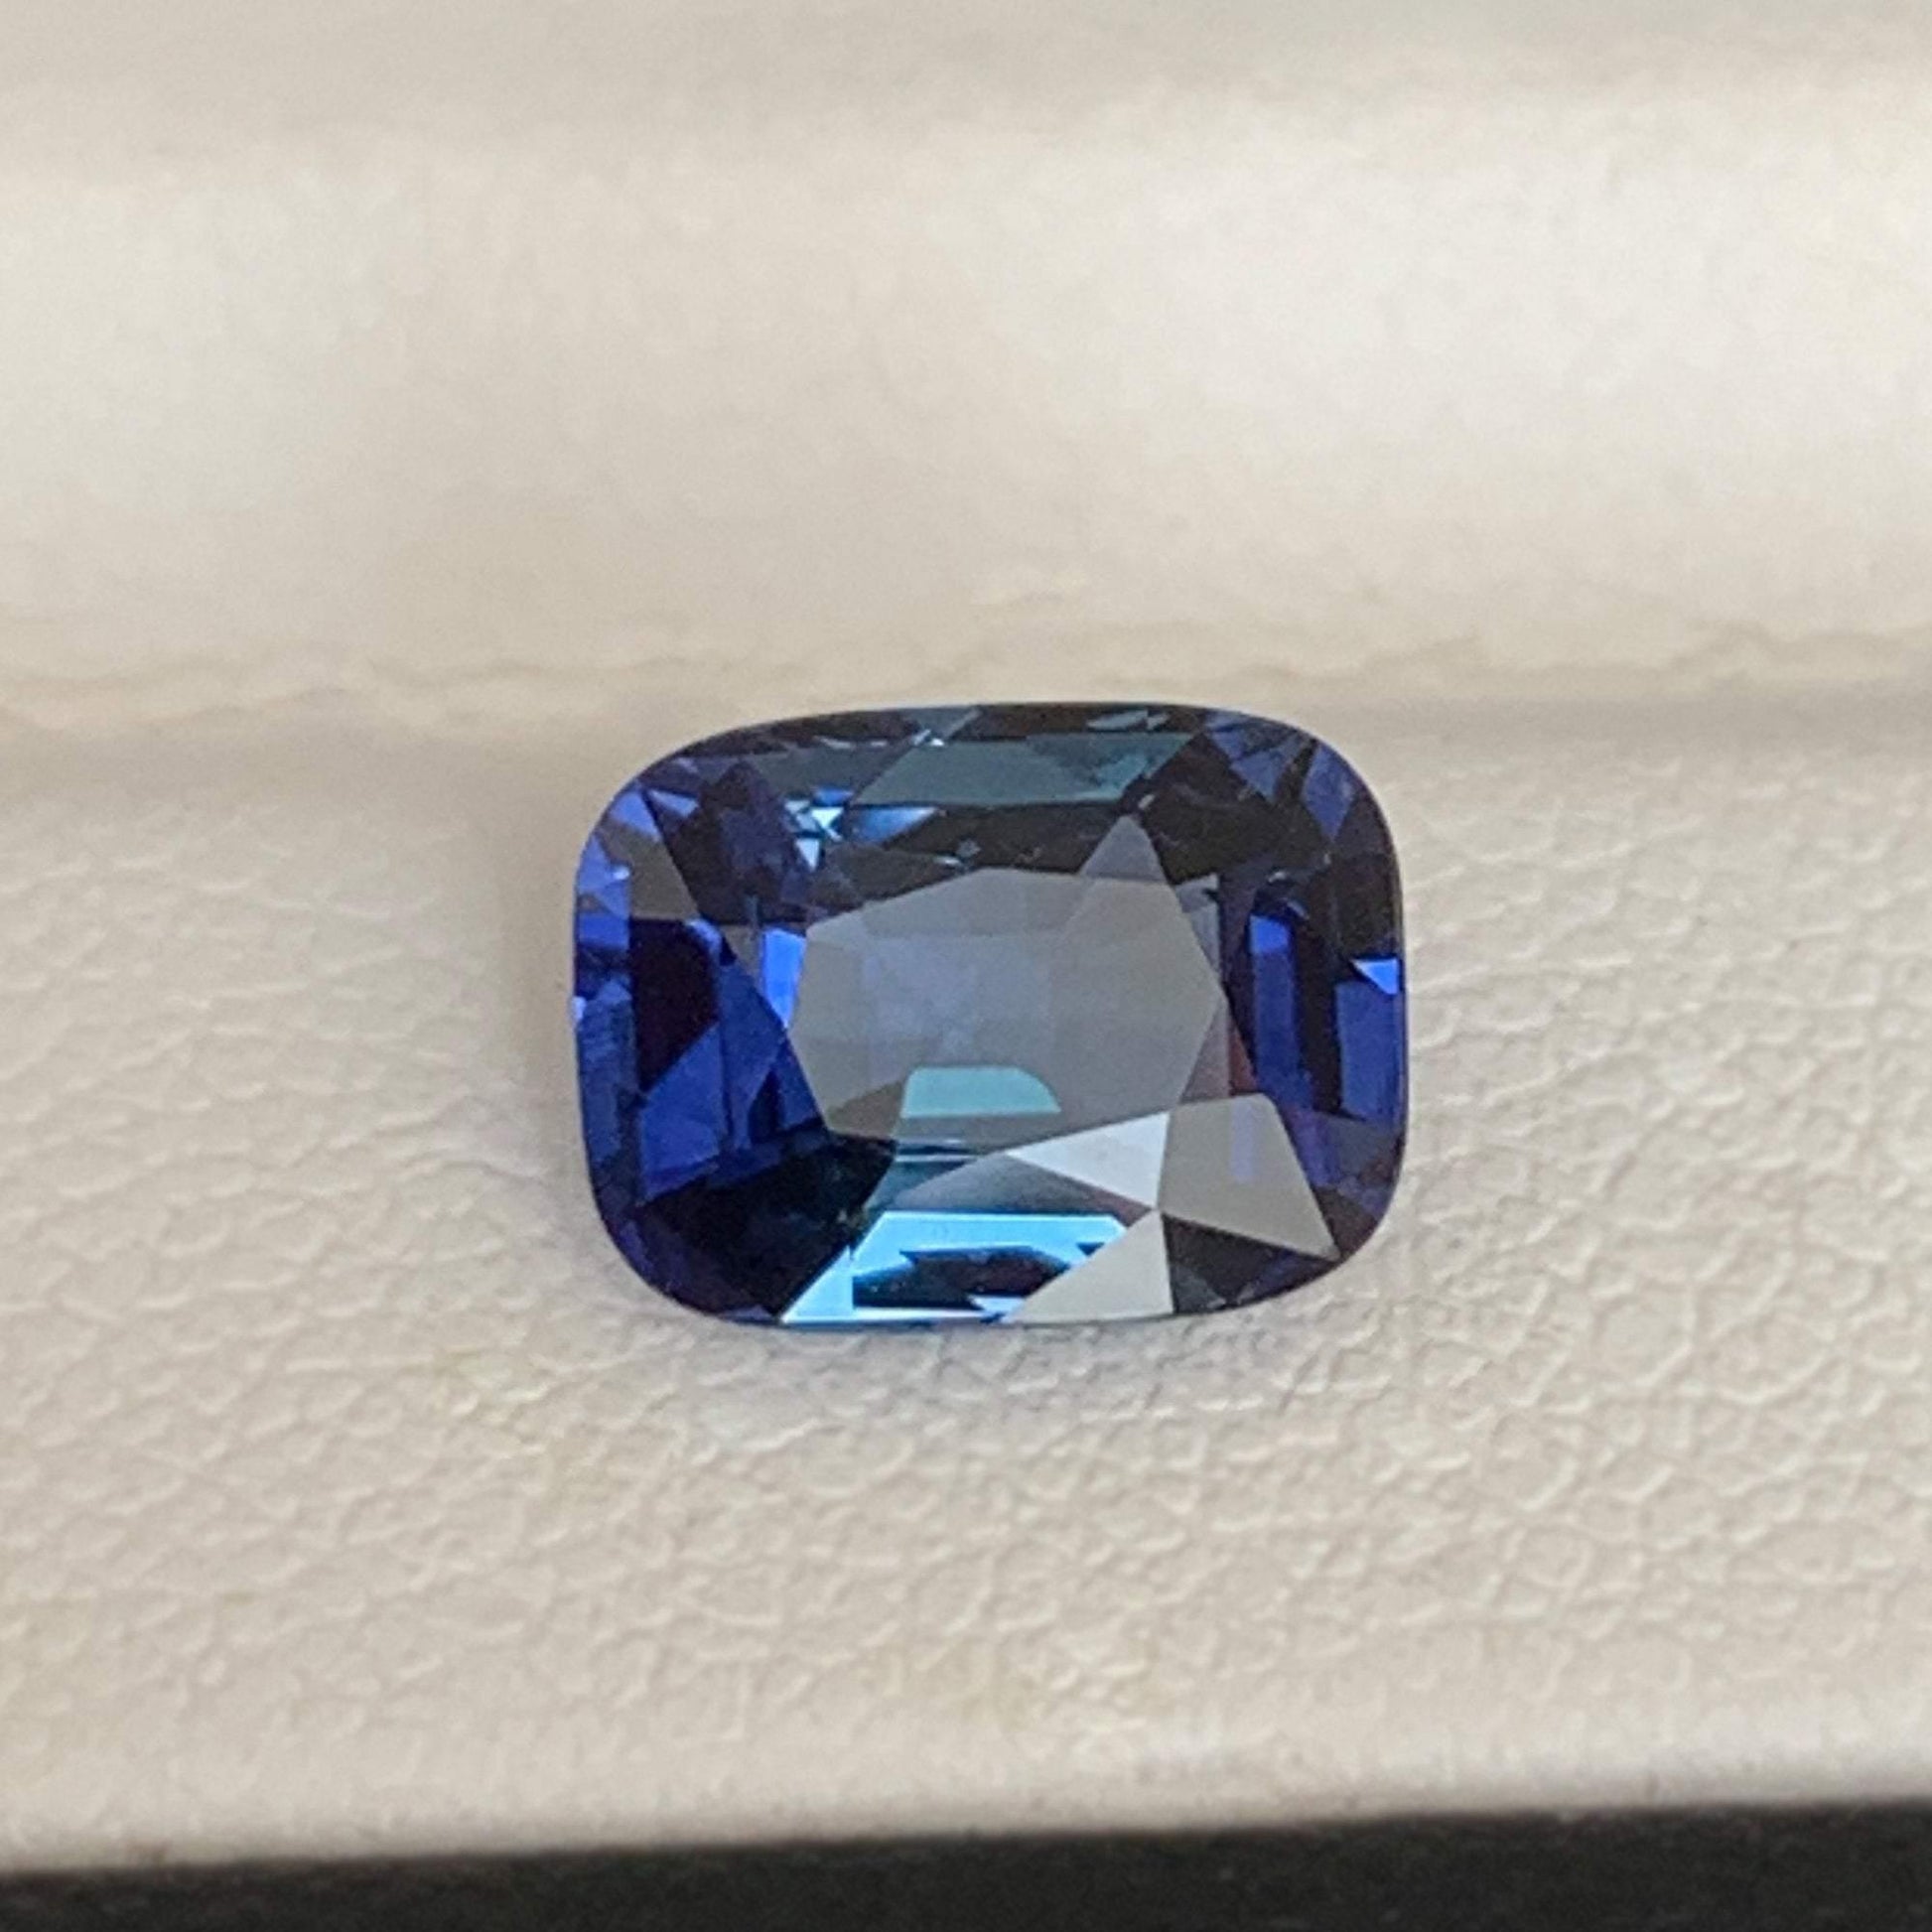 2.19CT Natural Teal Sapphire - Fine Sapphires